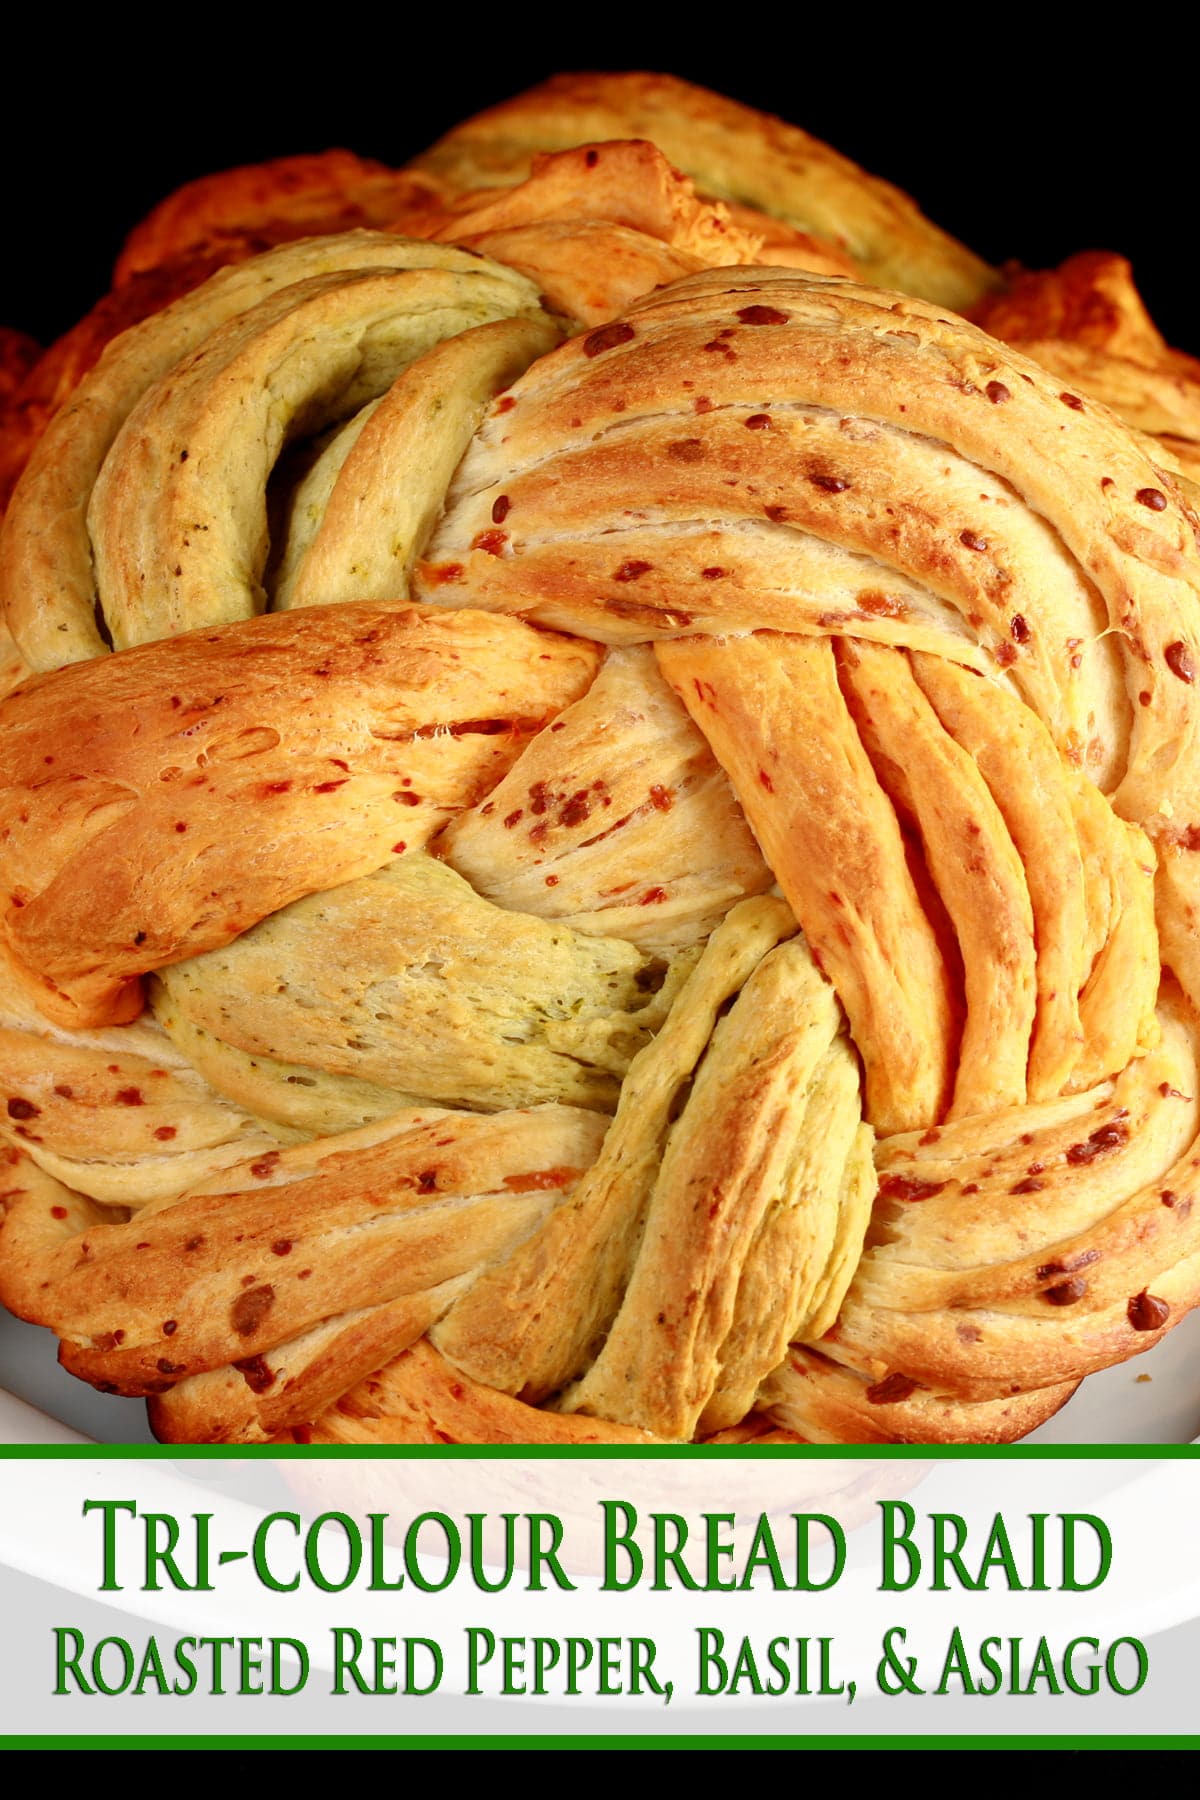 A large round loaf of a tri-colour braid bread. The breads are green/basil, tan/asiago, and red/roasted red pepper.